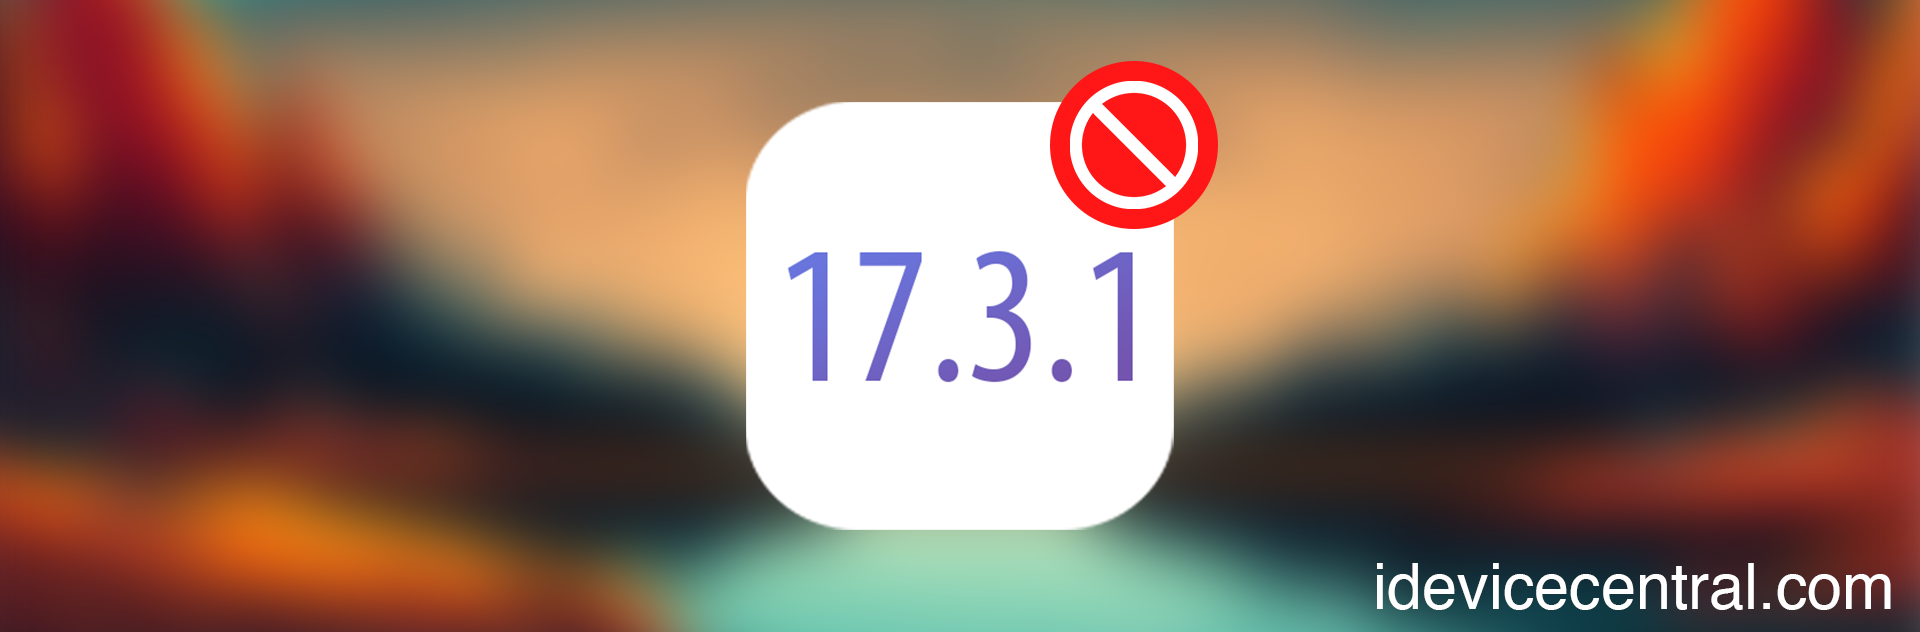 Apple Stops Signing iOS 17.3.1. Downgrades from iOS 17.4 / 17.4.1 Now Impossible